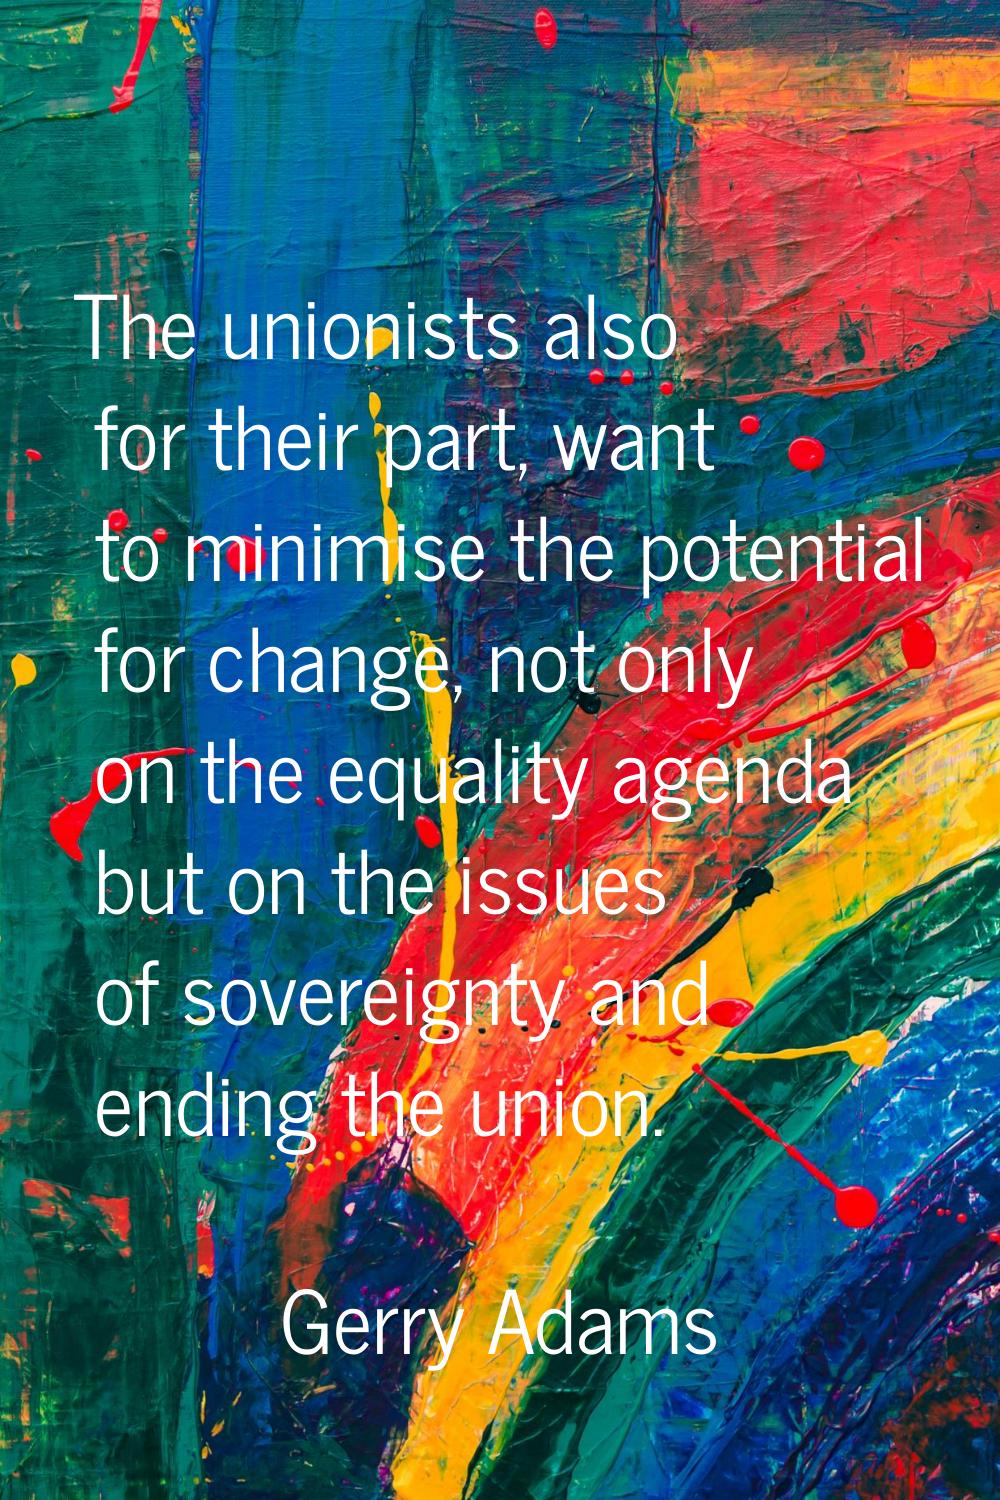 The unionists also for their part, want to minimise the potential for change, not only on the equal